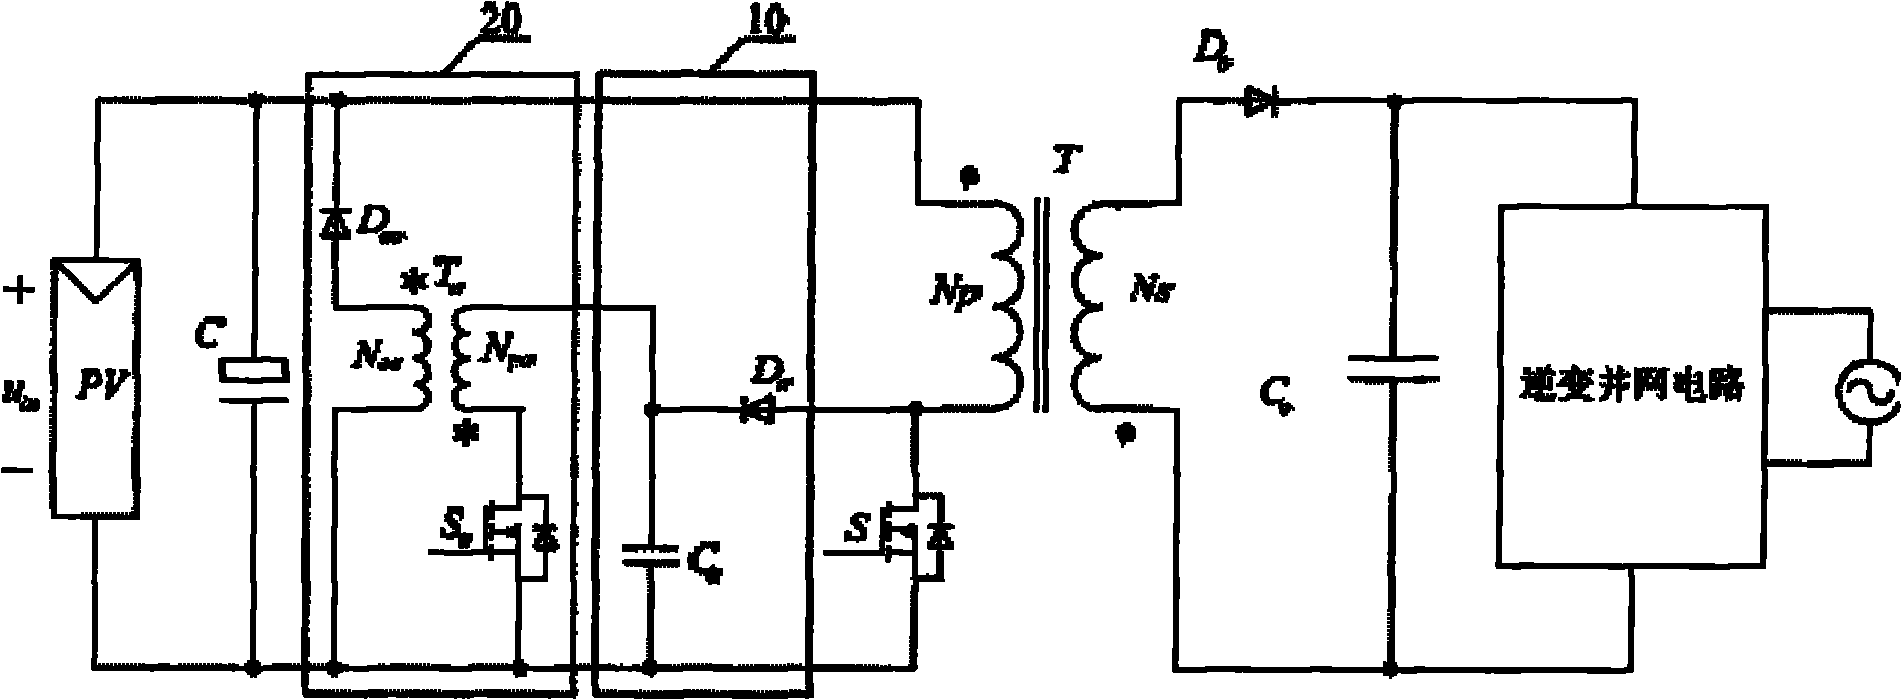 Flyback converter leakage inductance energy absorption feedback circuit of photovoltaic grid-connected inverter